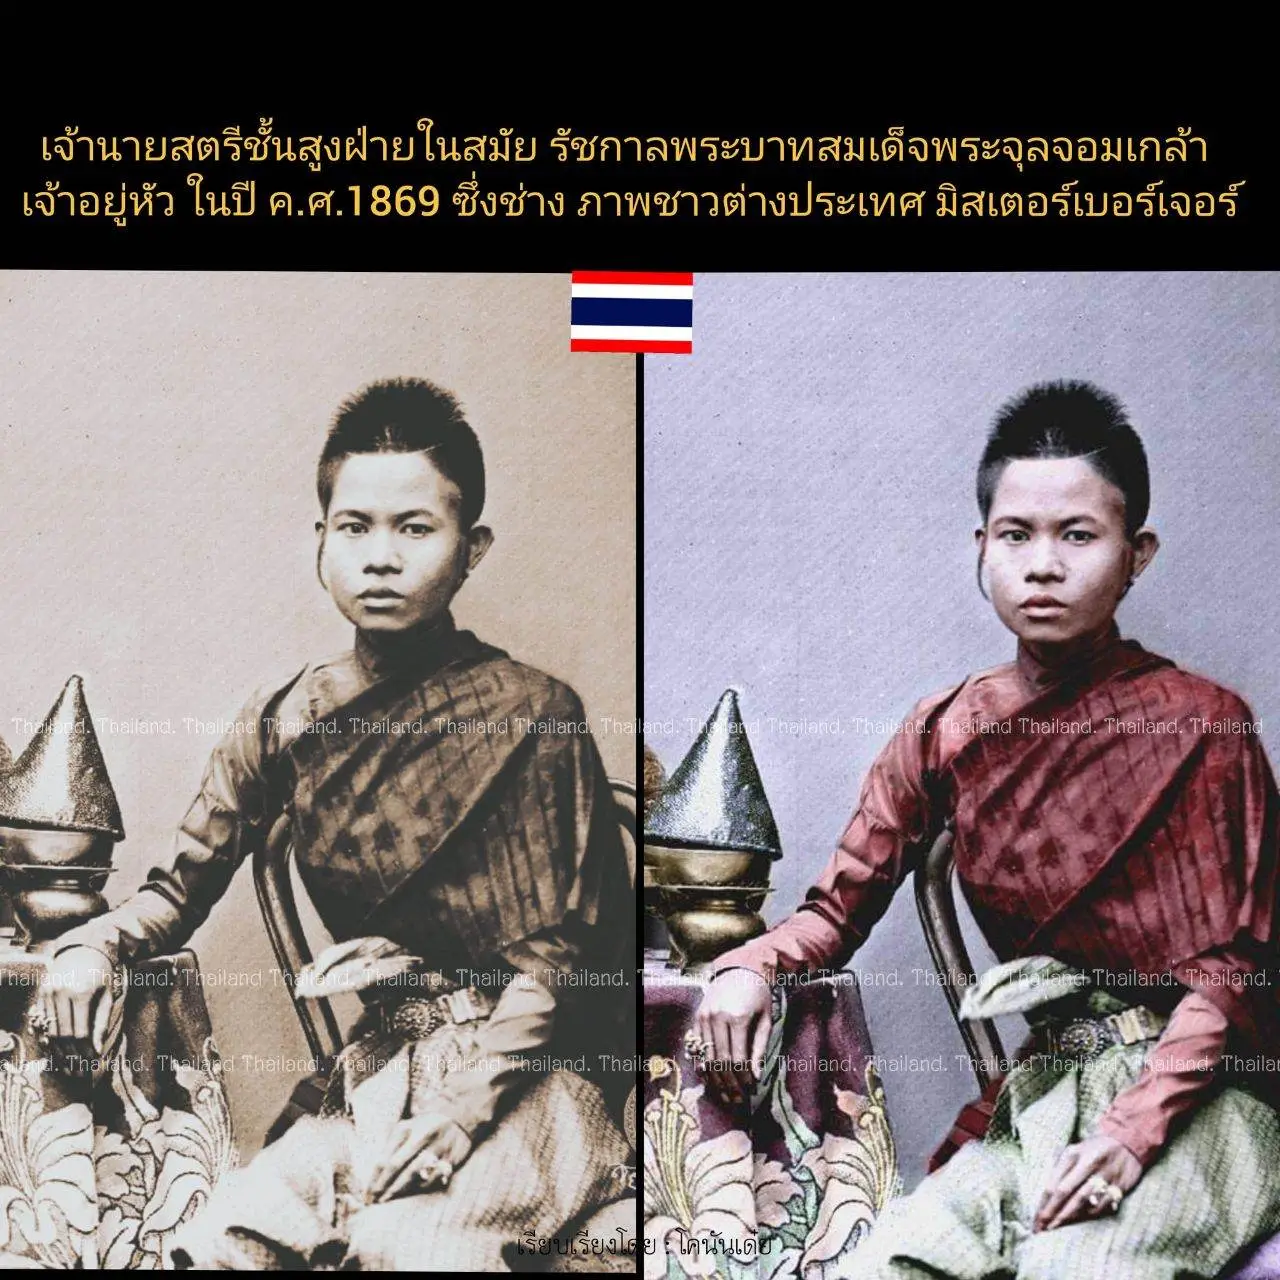 THAILAND 🇹🇭 | Colorized photo of Siam history